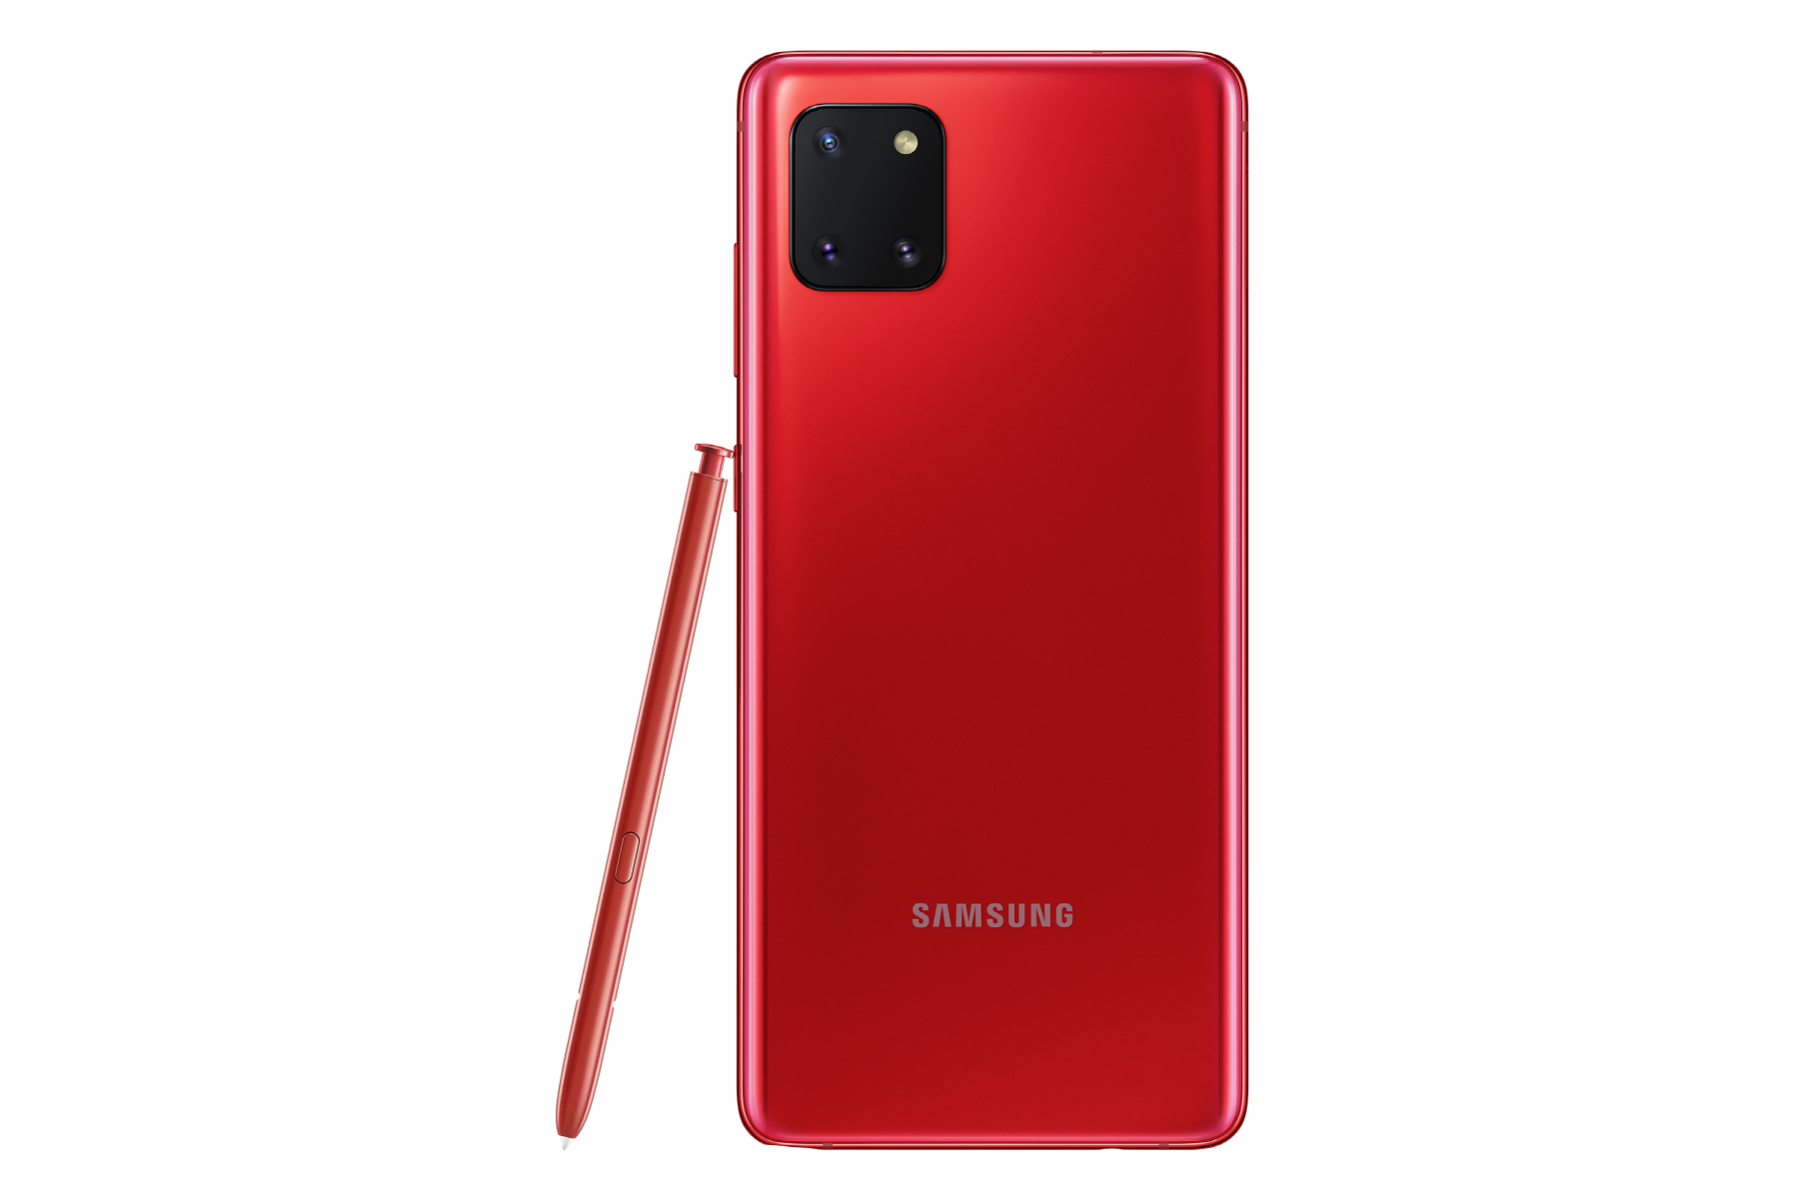 Samsung Galaxy Note 10 Lite review: a solid stylus choice - our